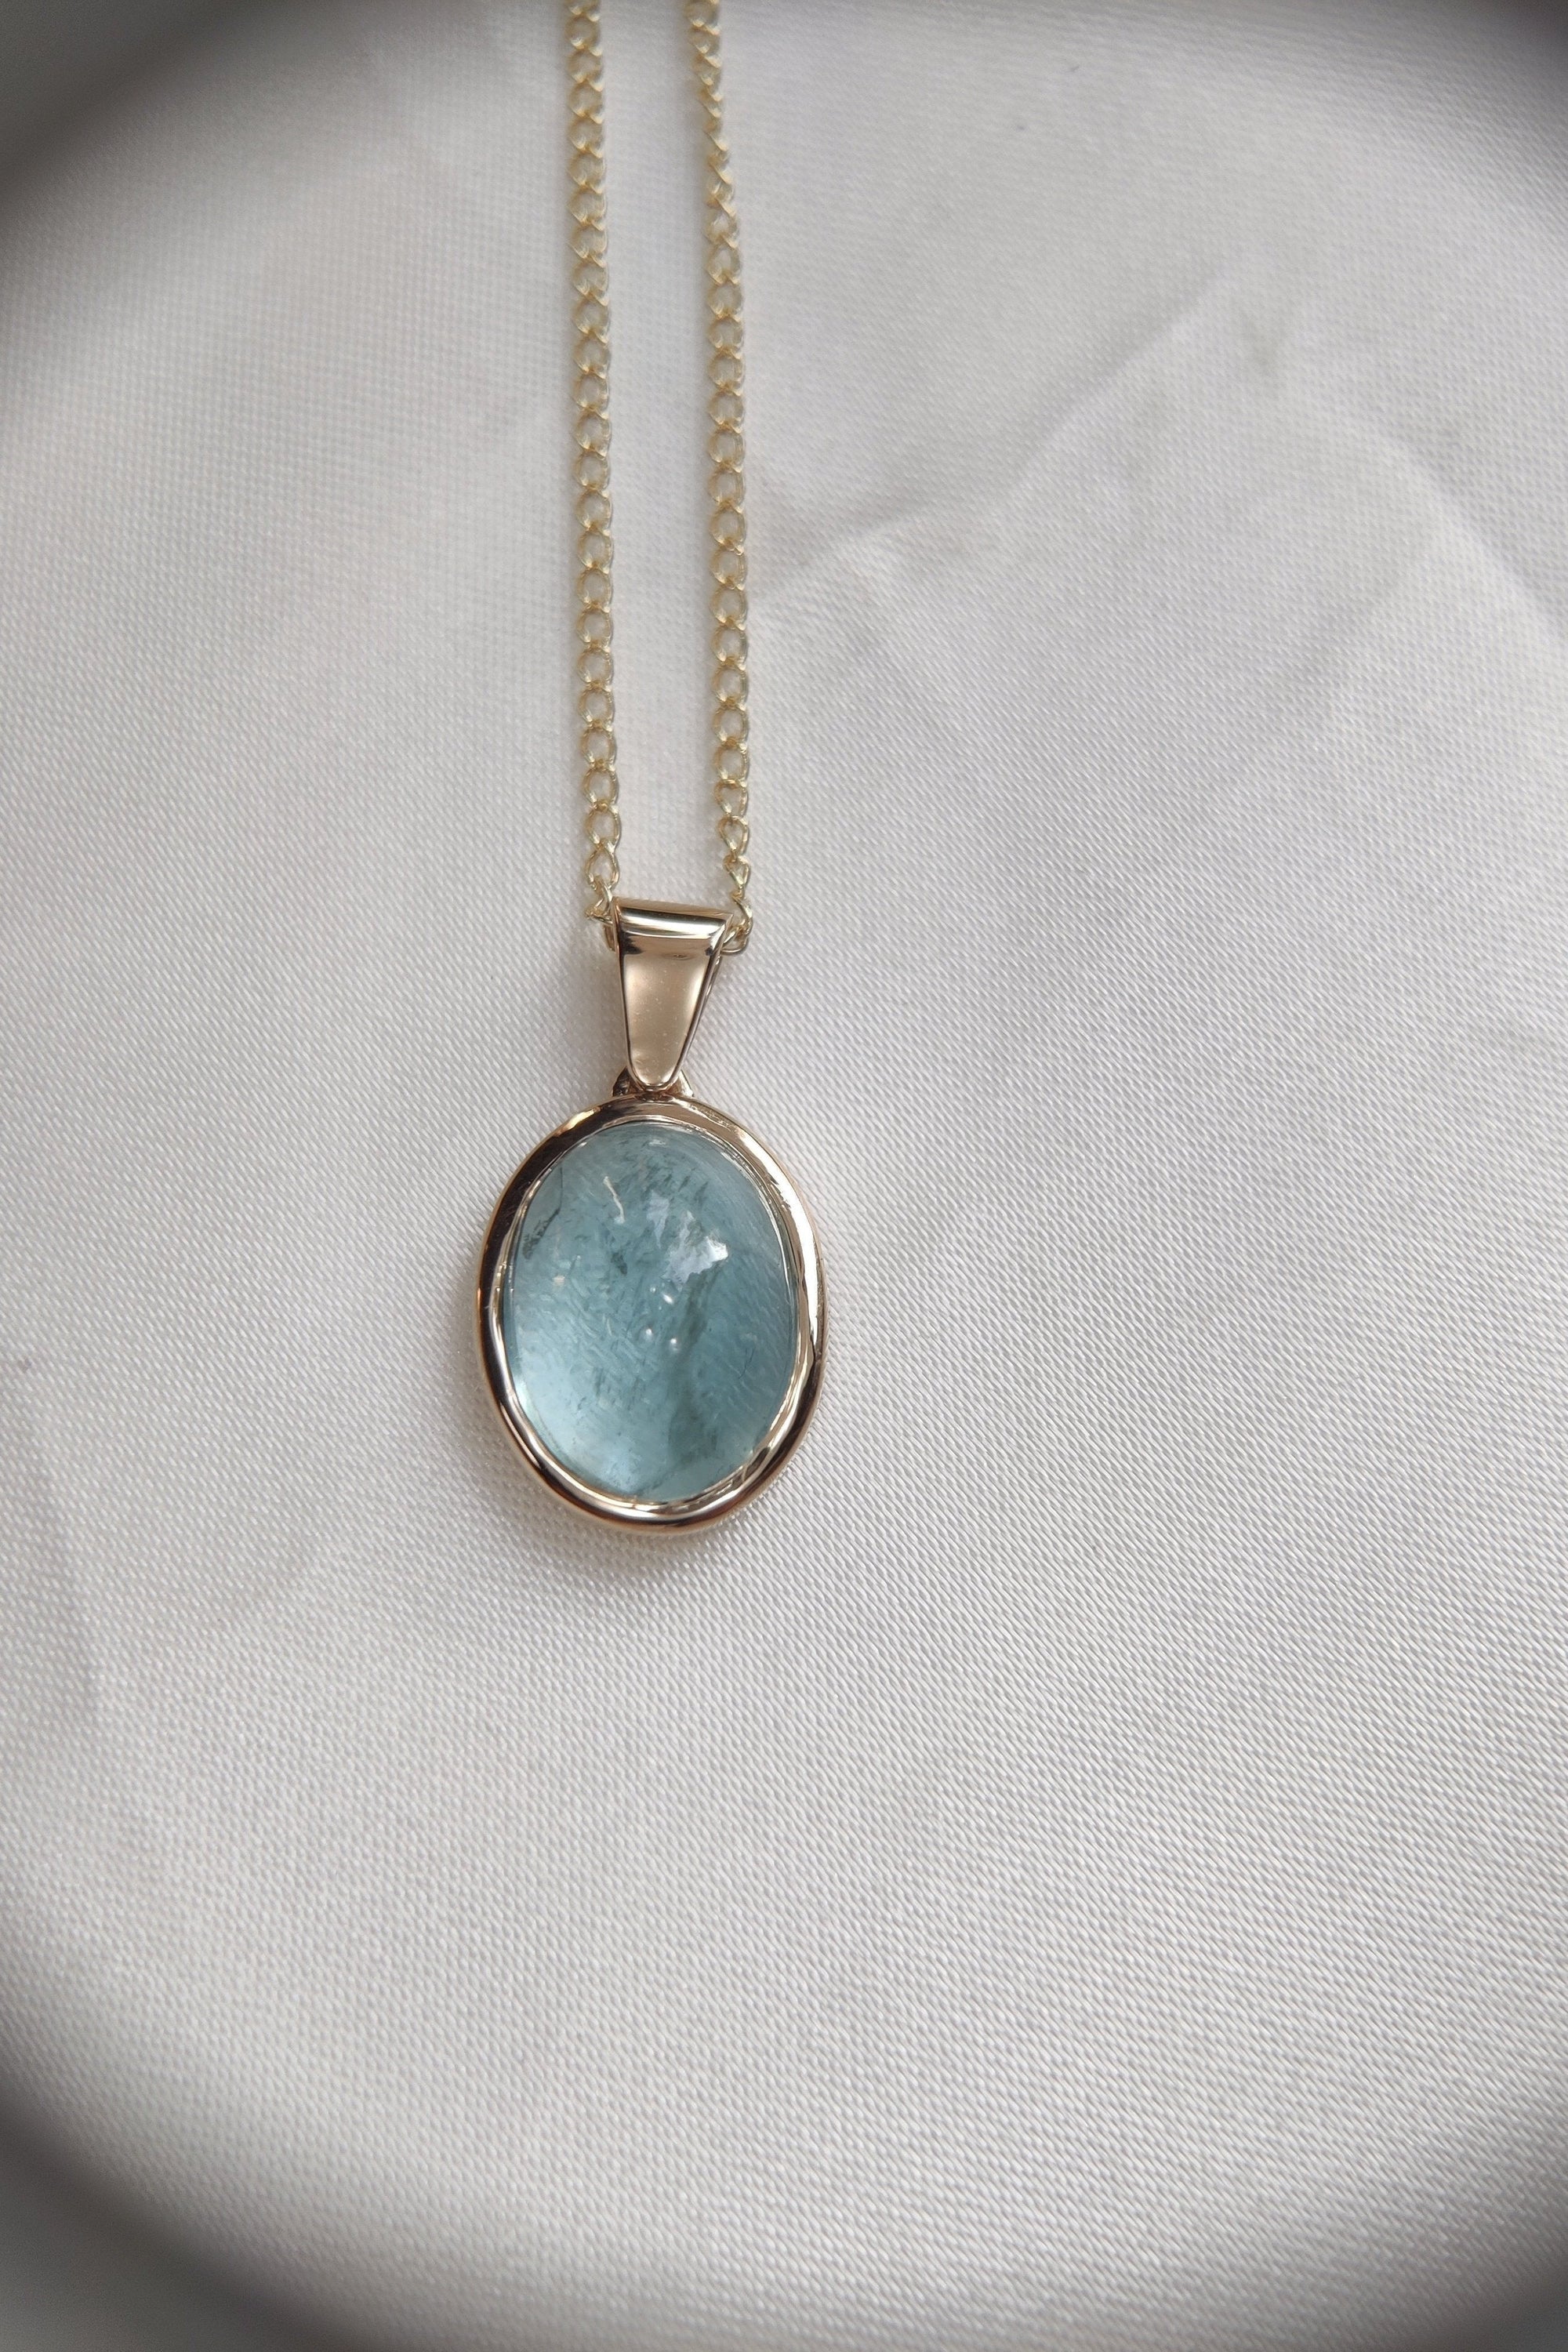 Aquamarine Cabochon Pendant and Necklace in 9 carat Yellow Gold-The Diamond Setter